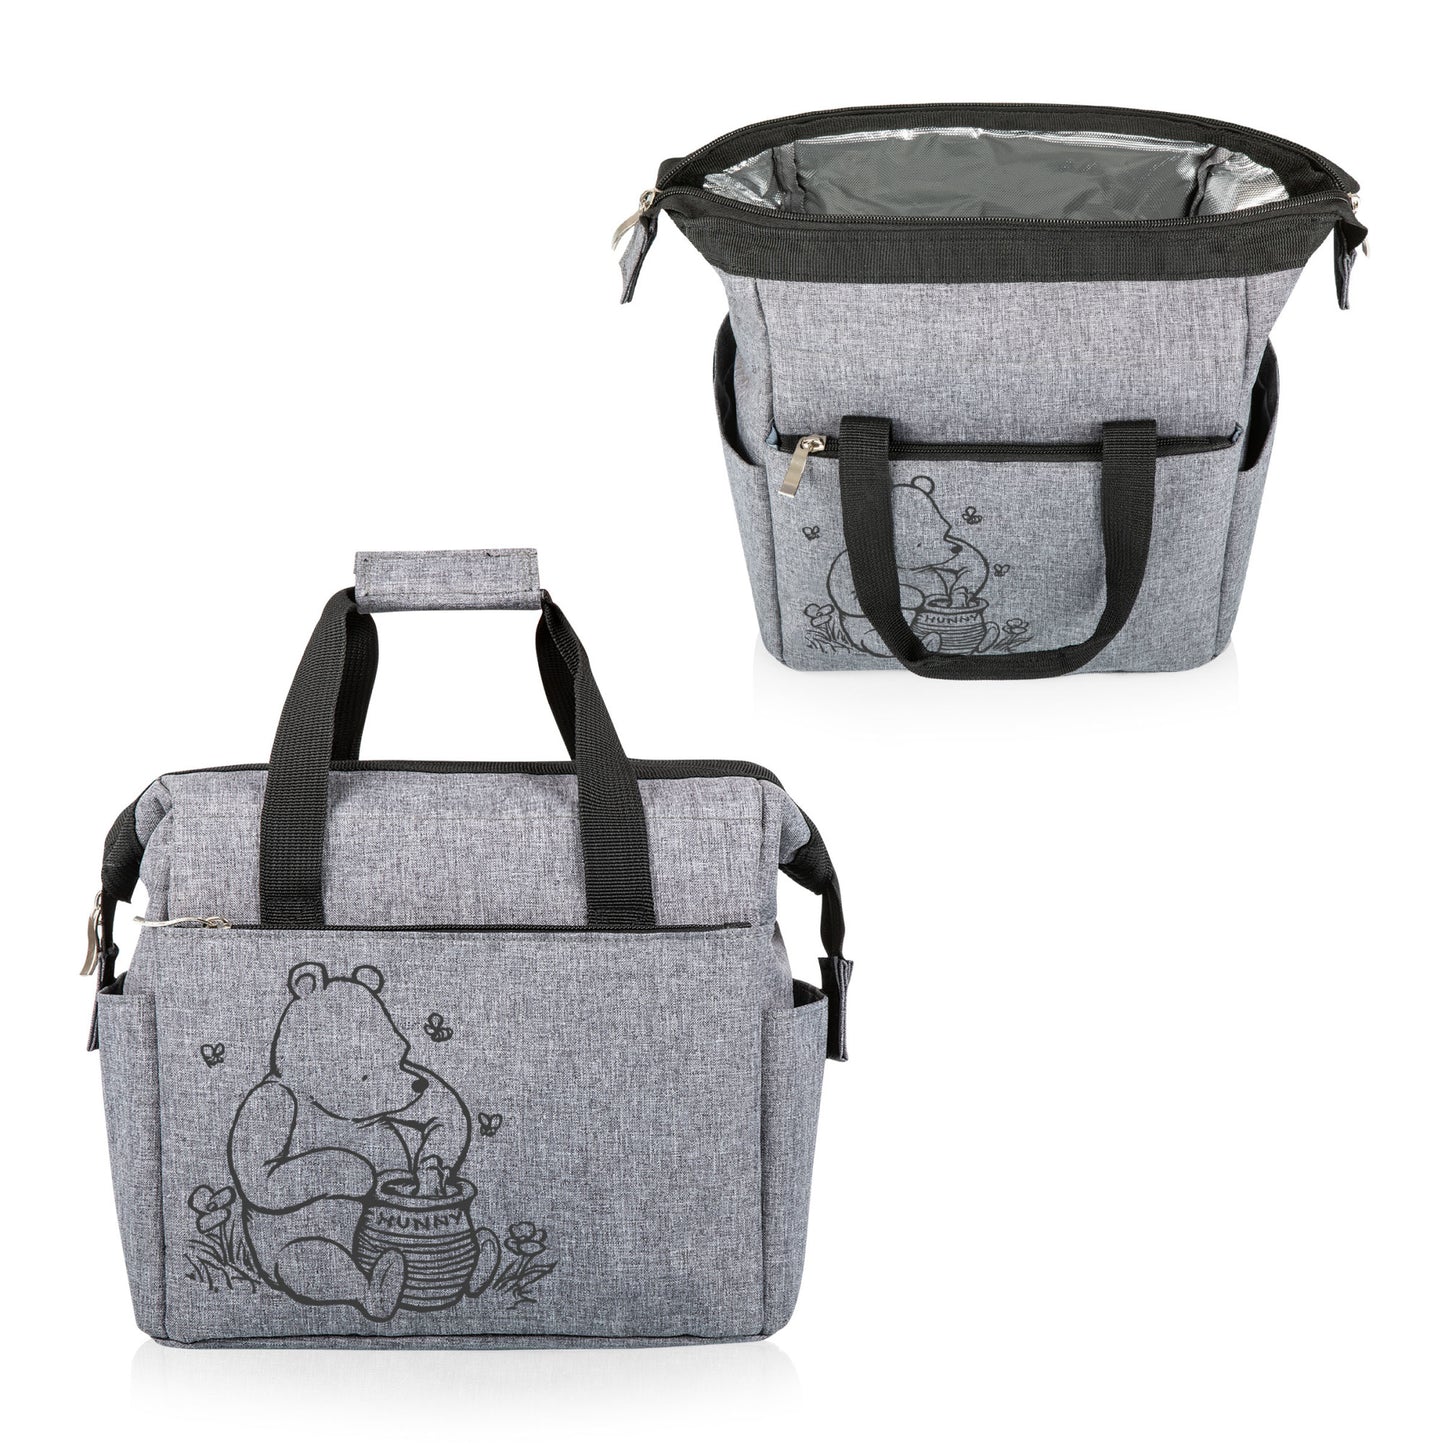 Winnie The Pooh (Disney) Heather Gray Insulated Lunch Tote Bag